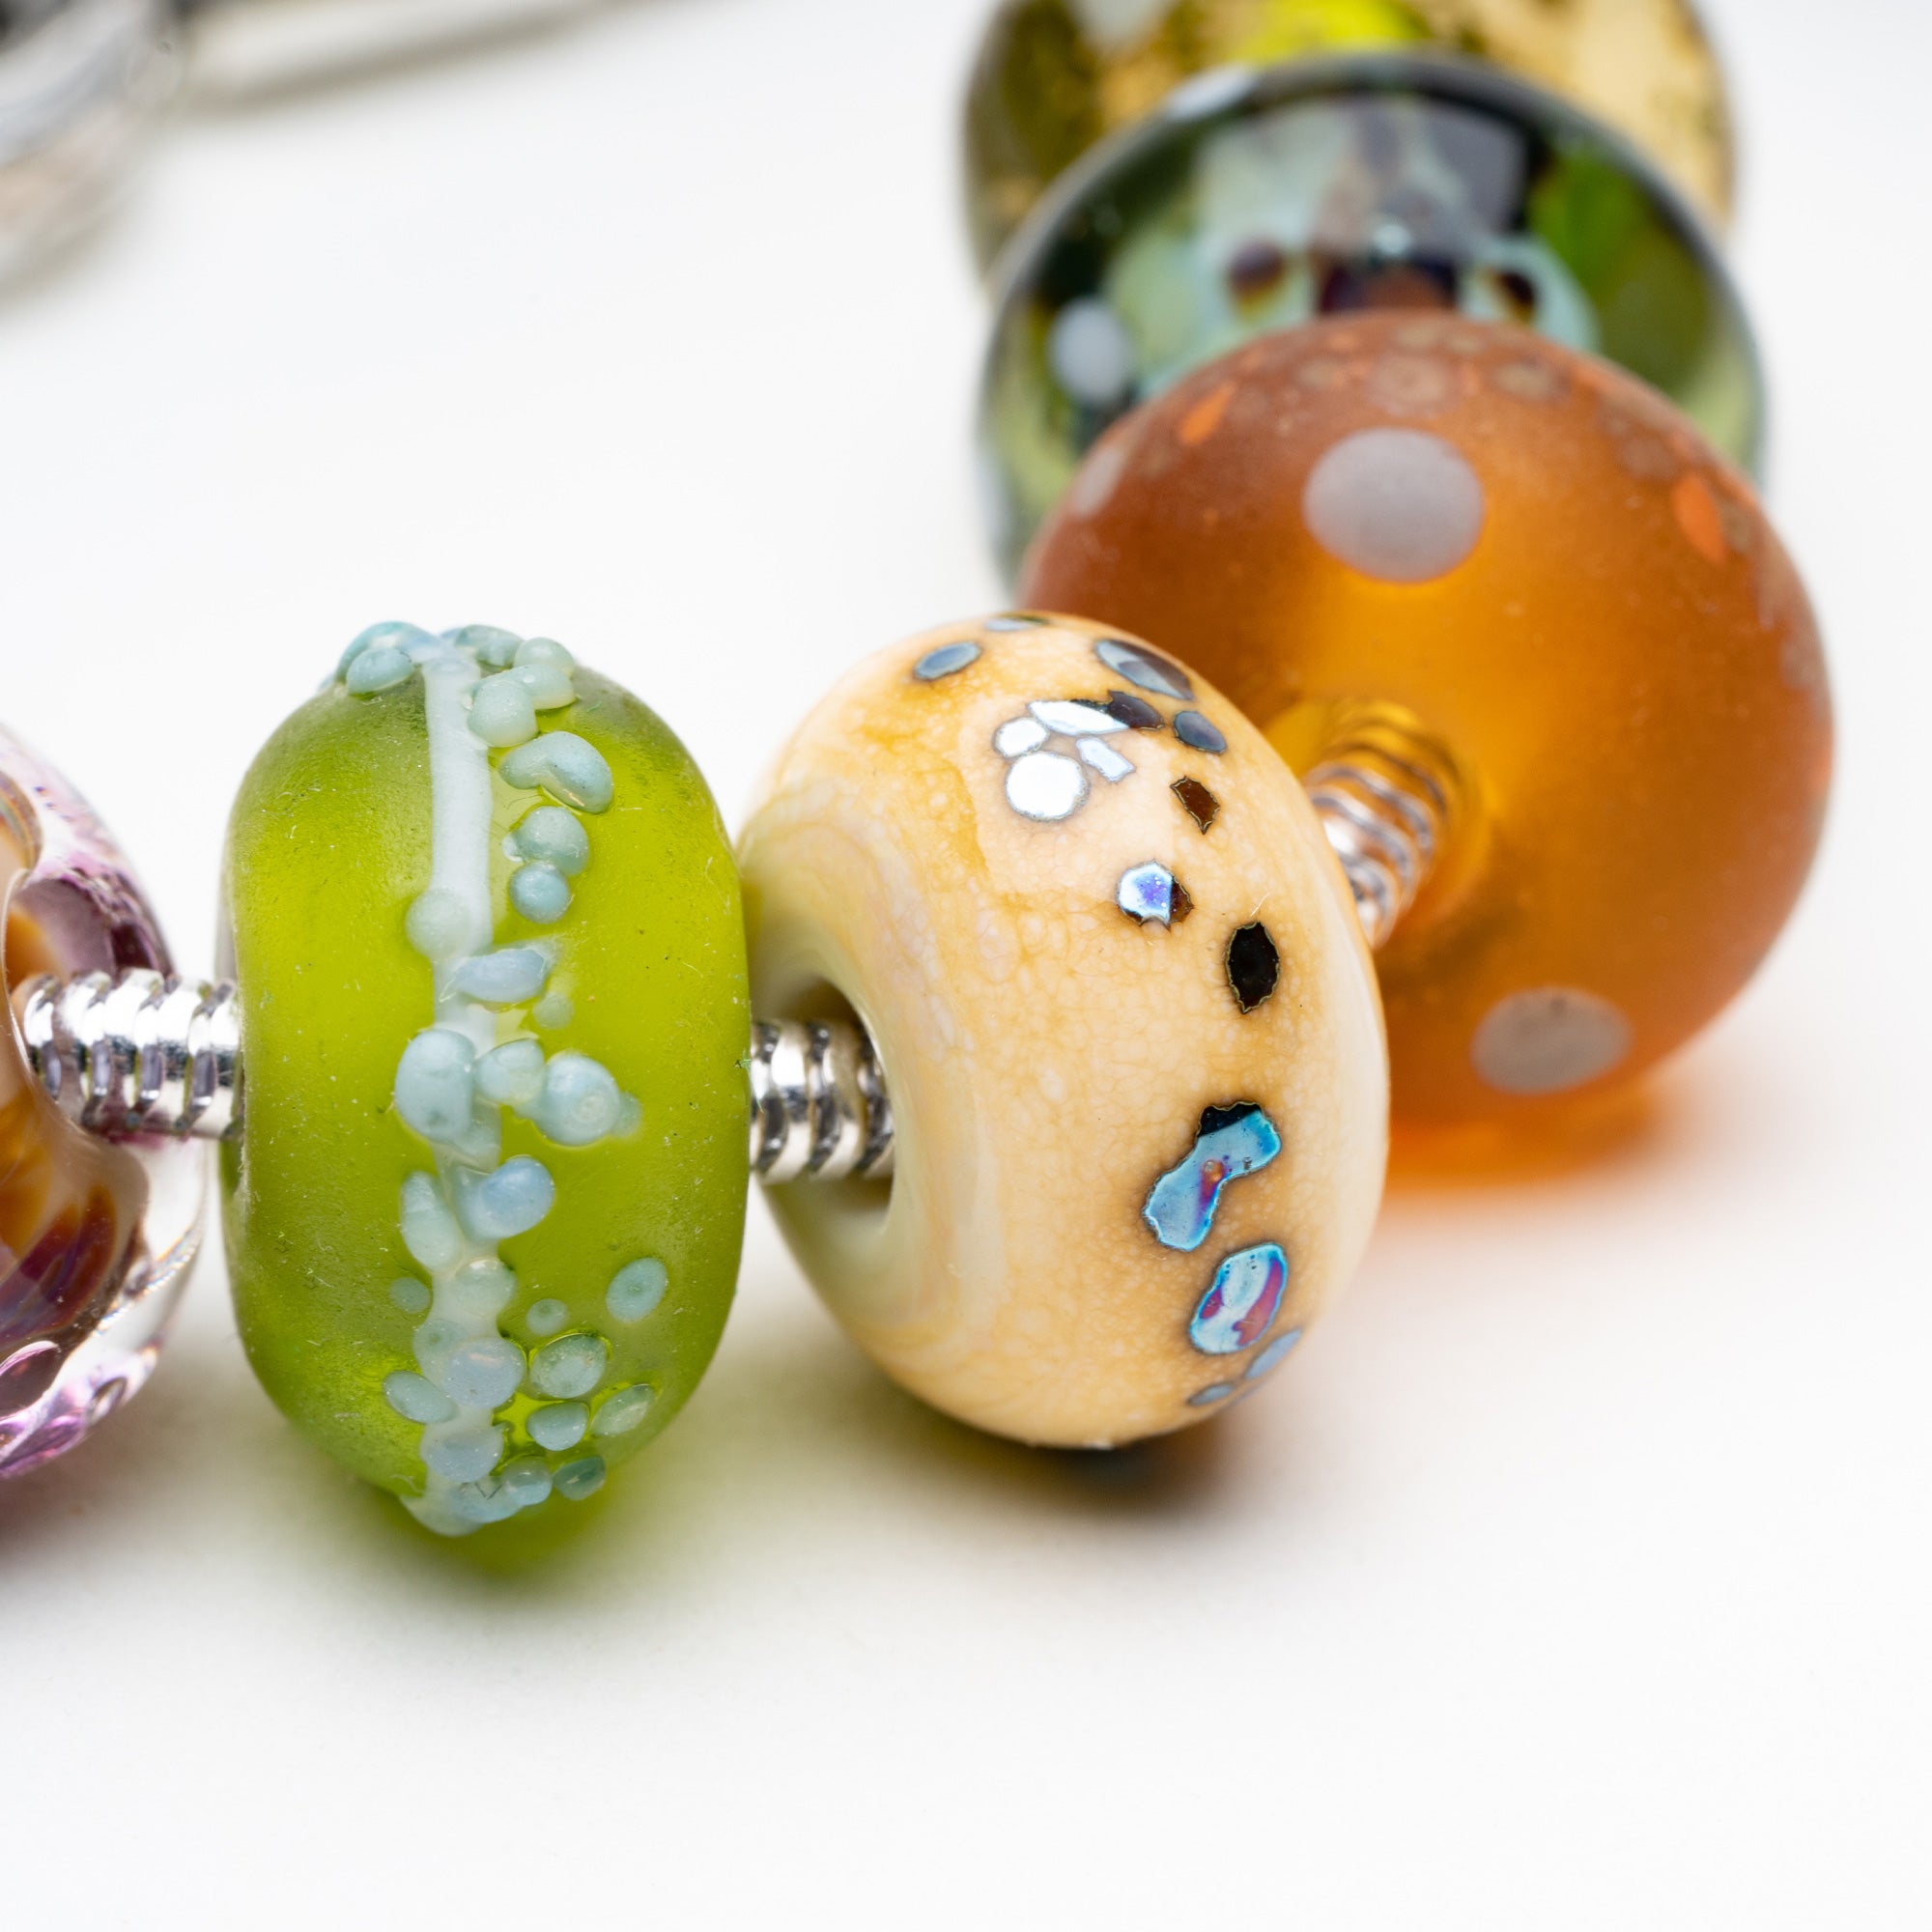 Borwn, green and cream earthy nature coloured glass beads representing the UK's national parks and countryside.